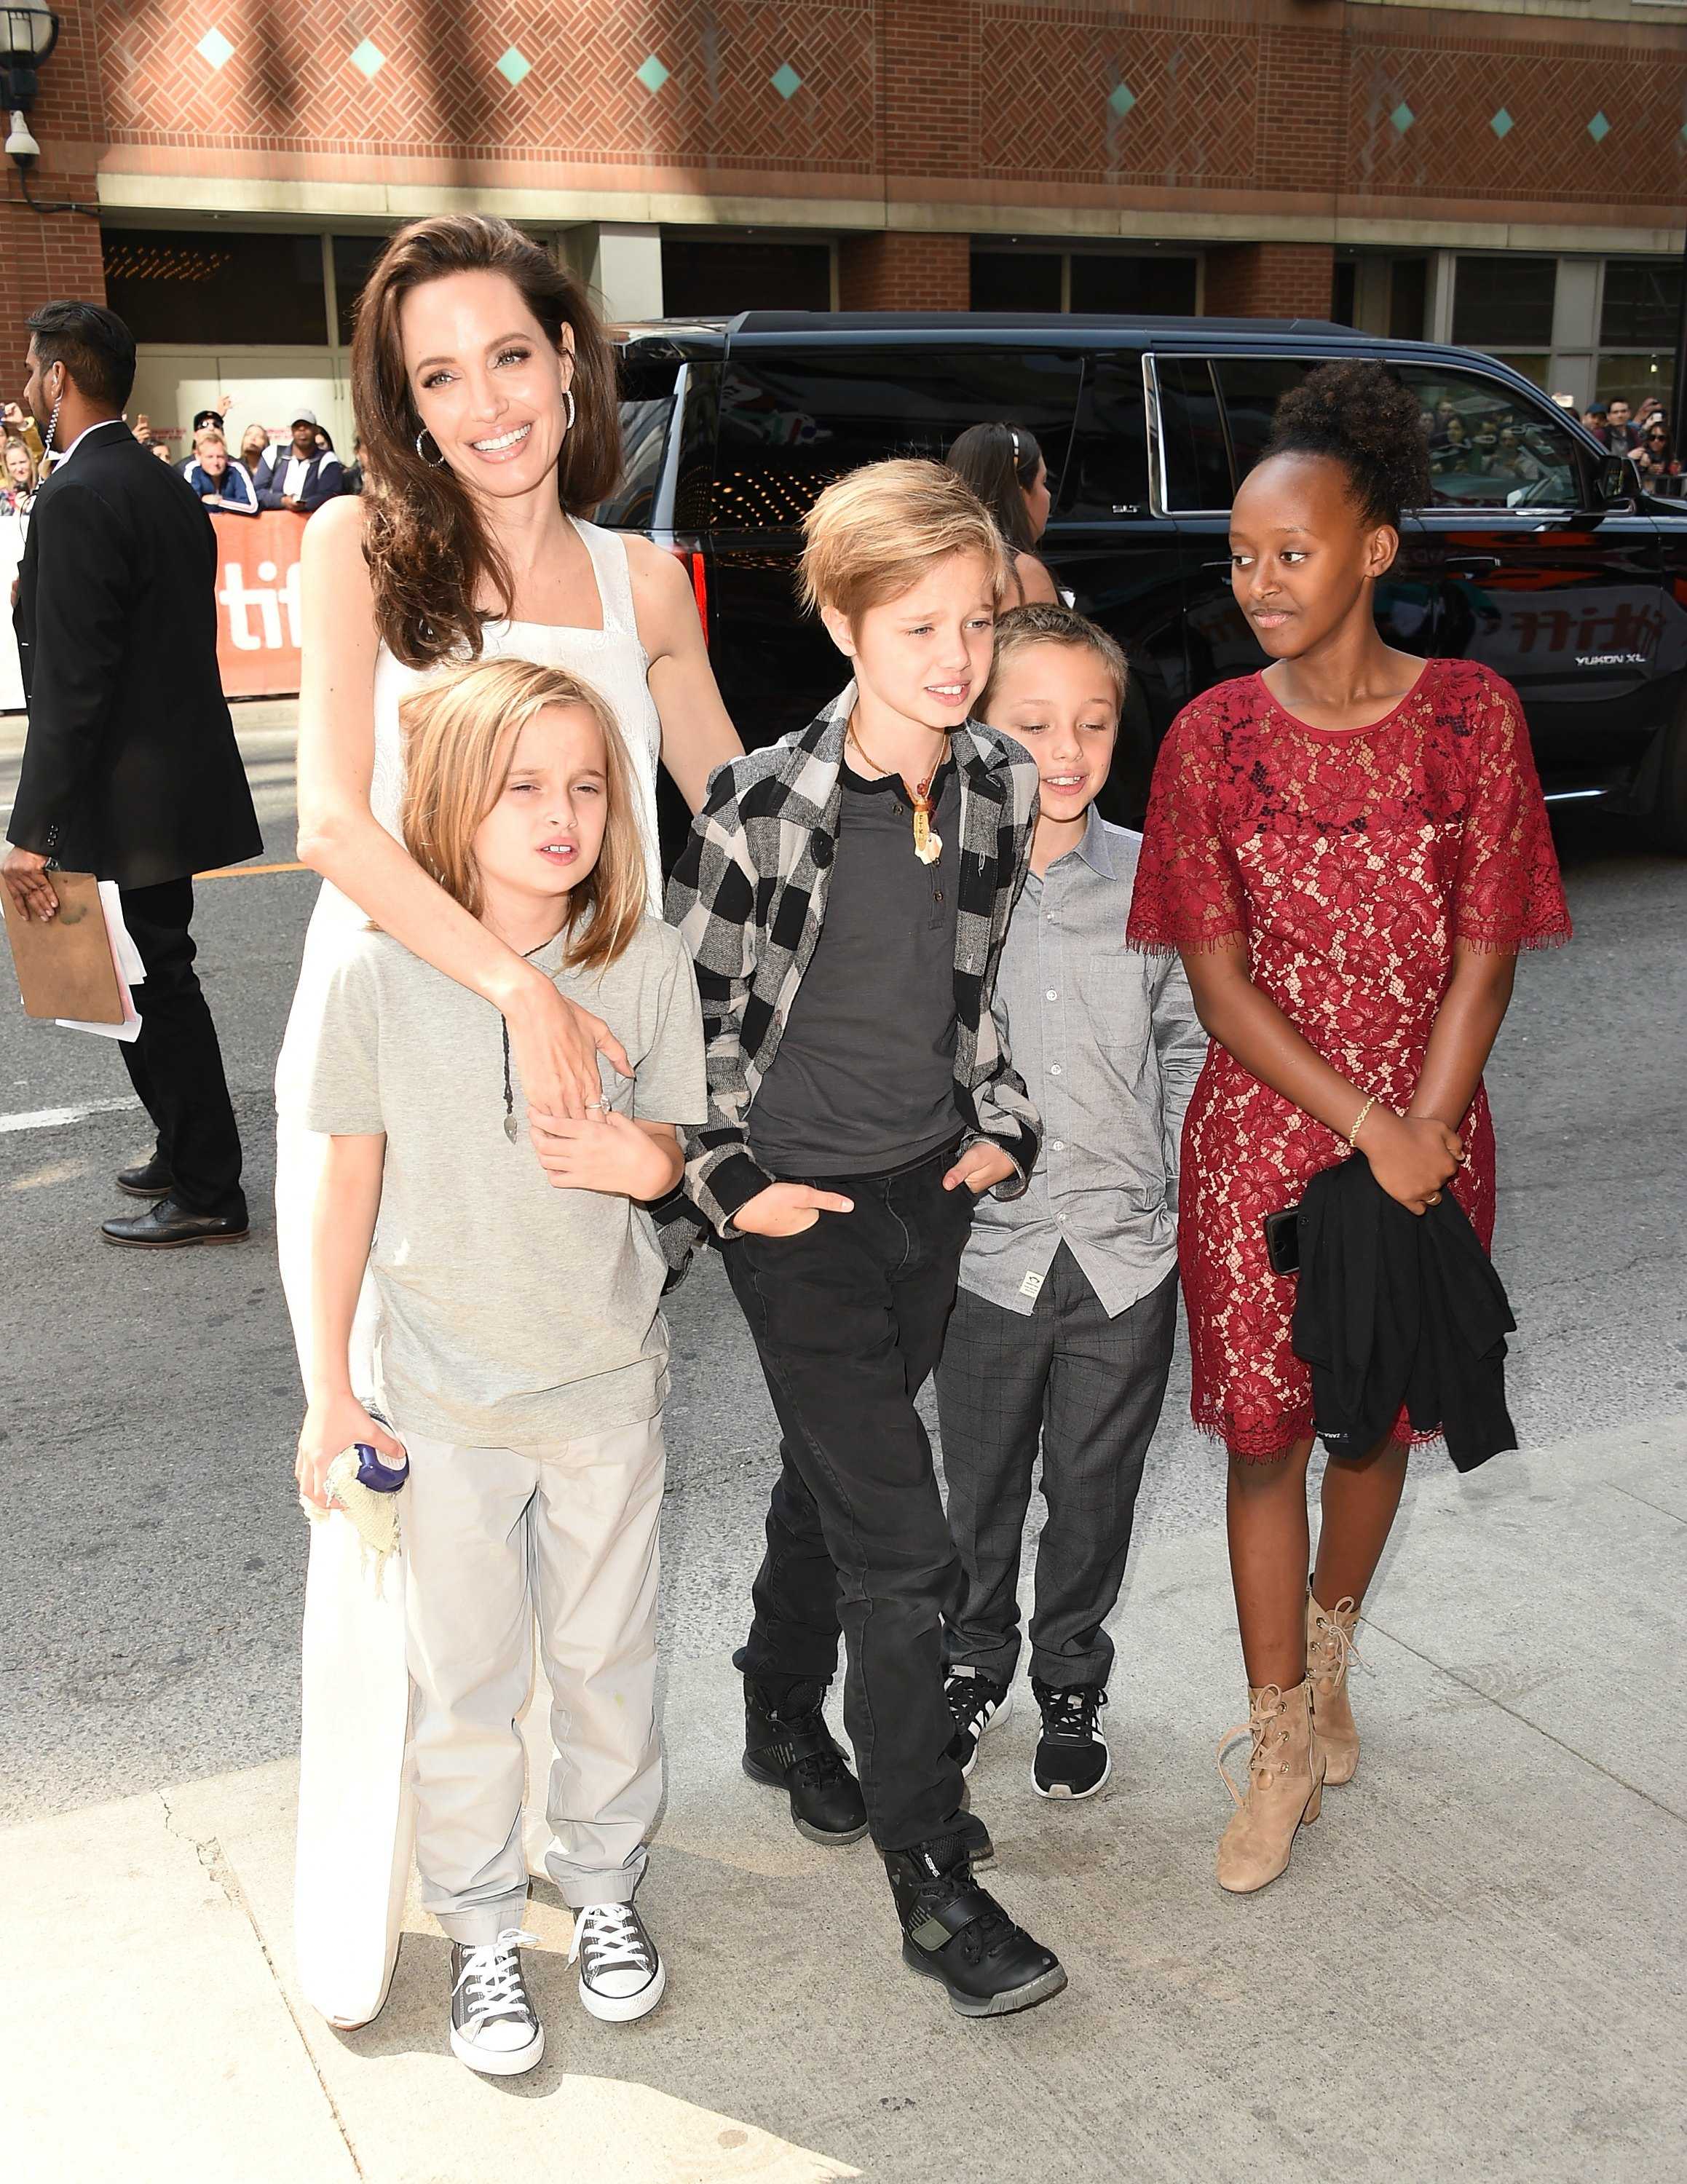 This is what Brad and Angelina’s children look like now and they are so grown up